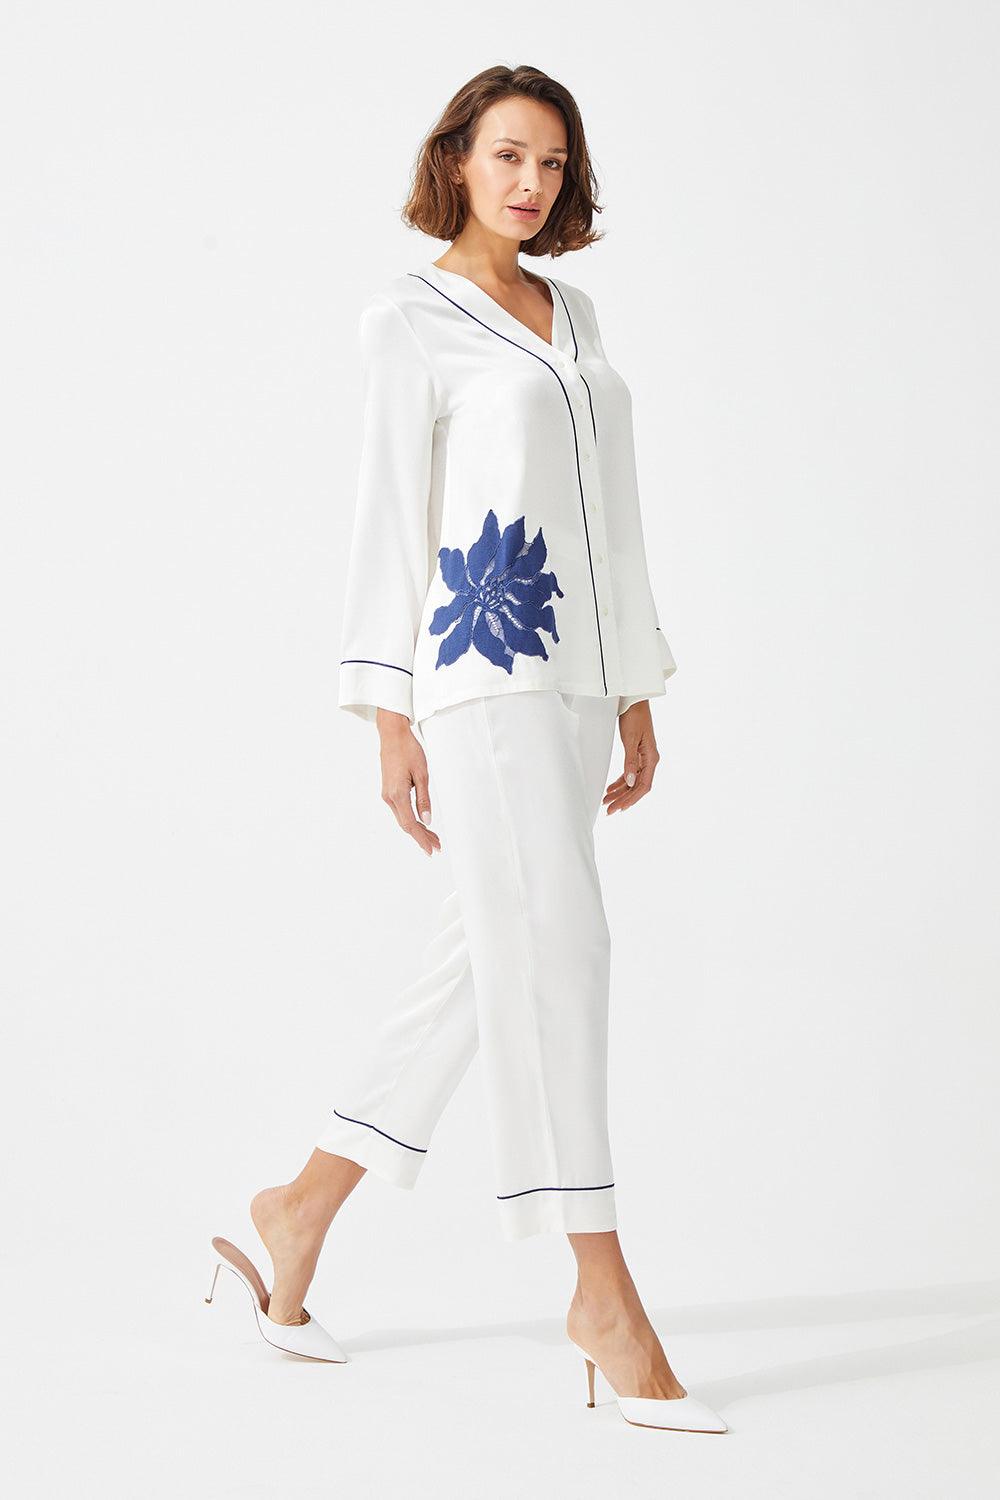 Diantha Trimmed Rayon and Buttoned Long Sleeve Pyjama Set - Off White - Bocan